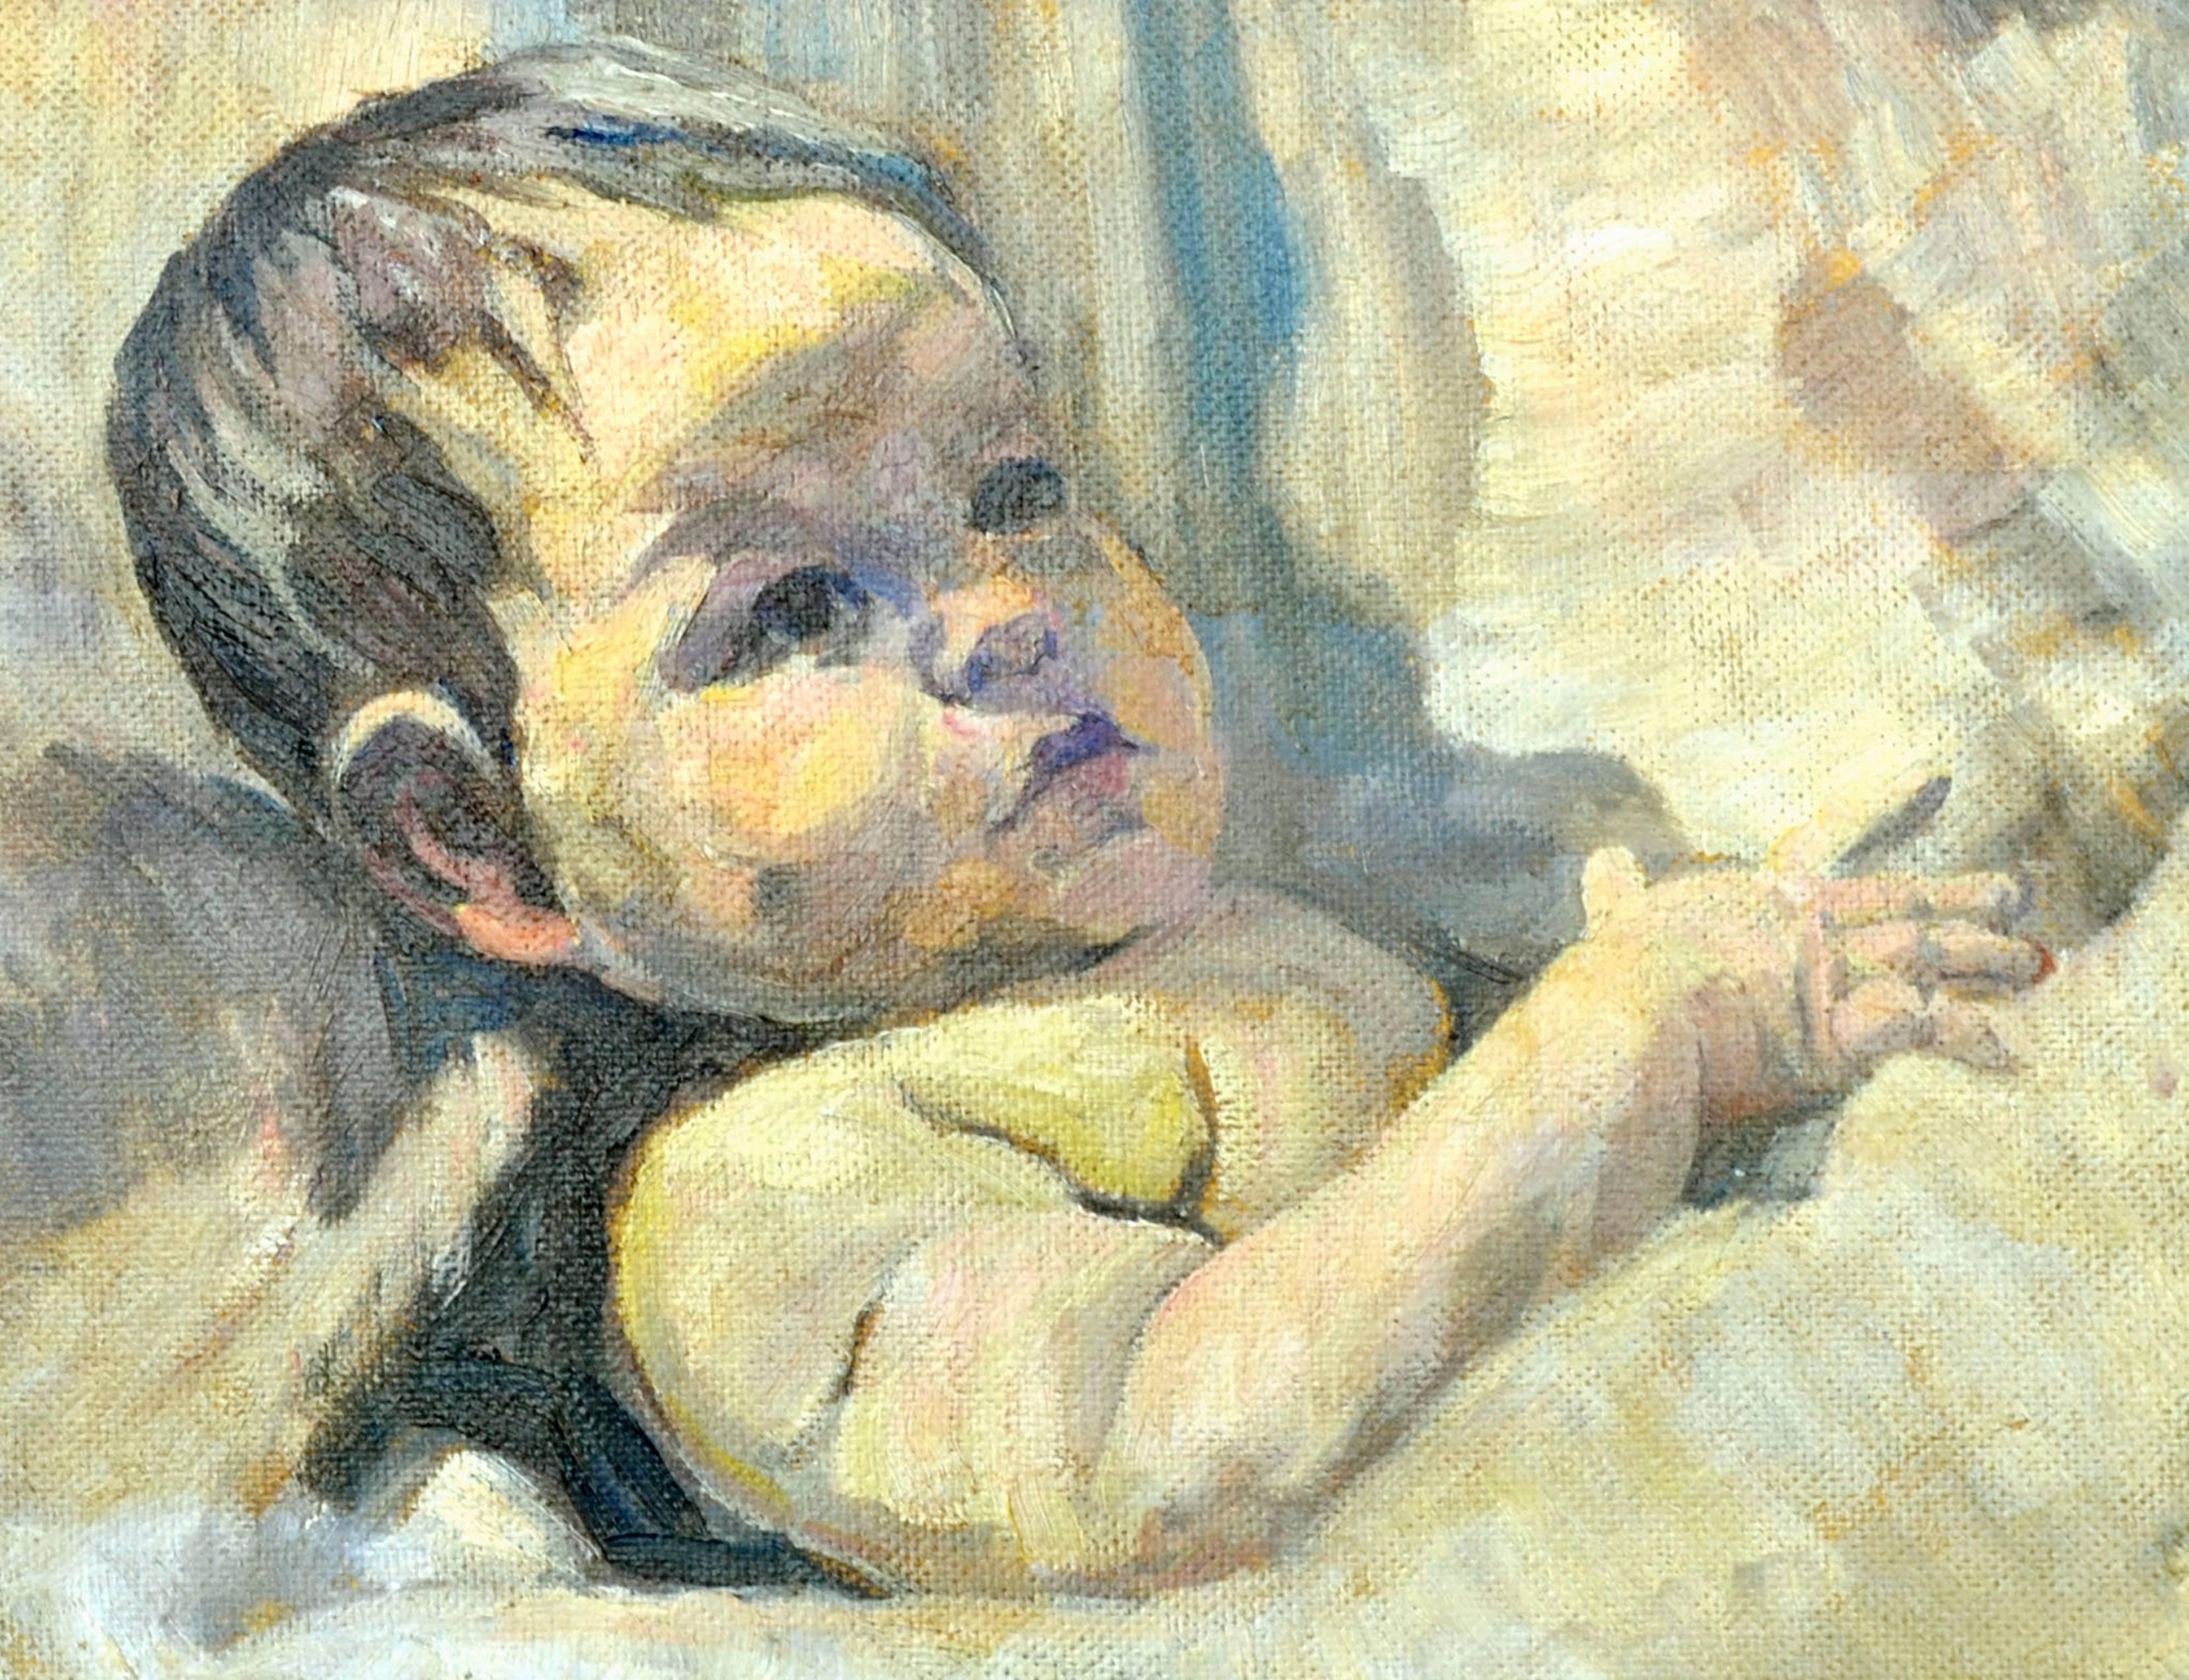 Early 20th Century Portrait of a Baby - American Impressionist Painting by Unknown